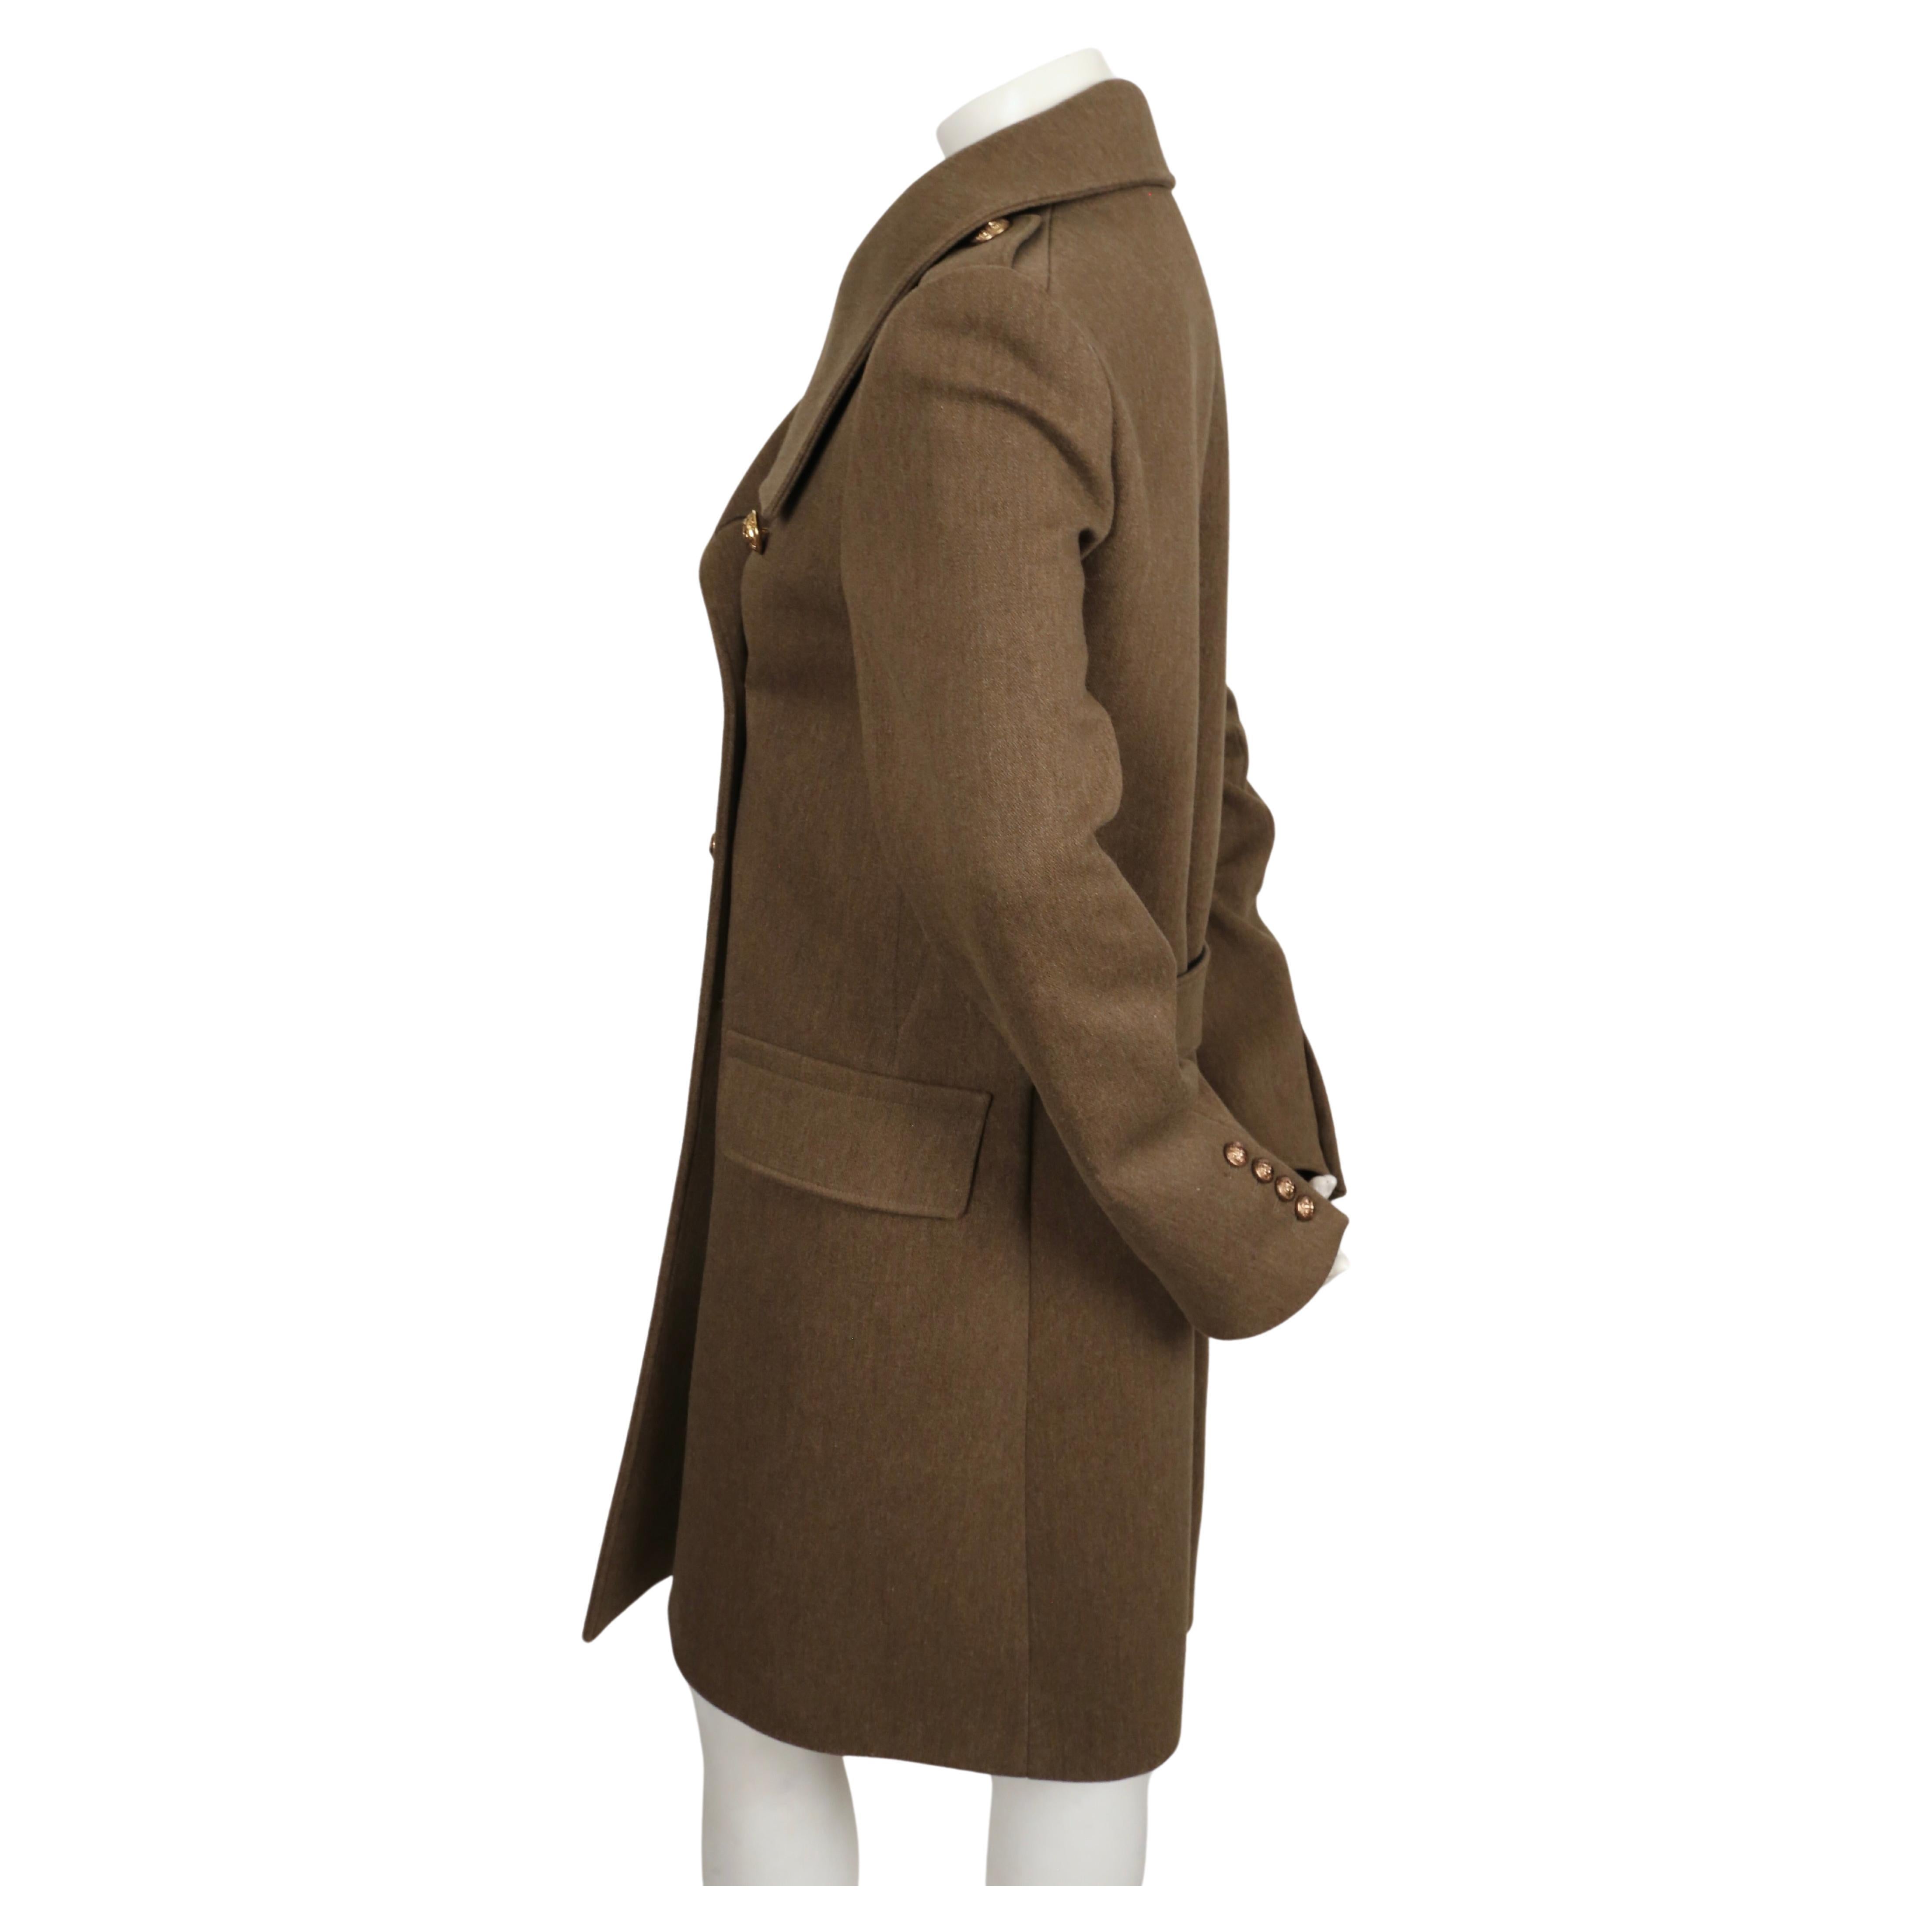 Women's or Men's 2011 BALMAIN olive green melton wool long military coat - new with tags For Sale